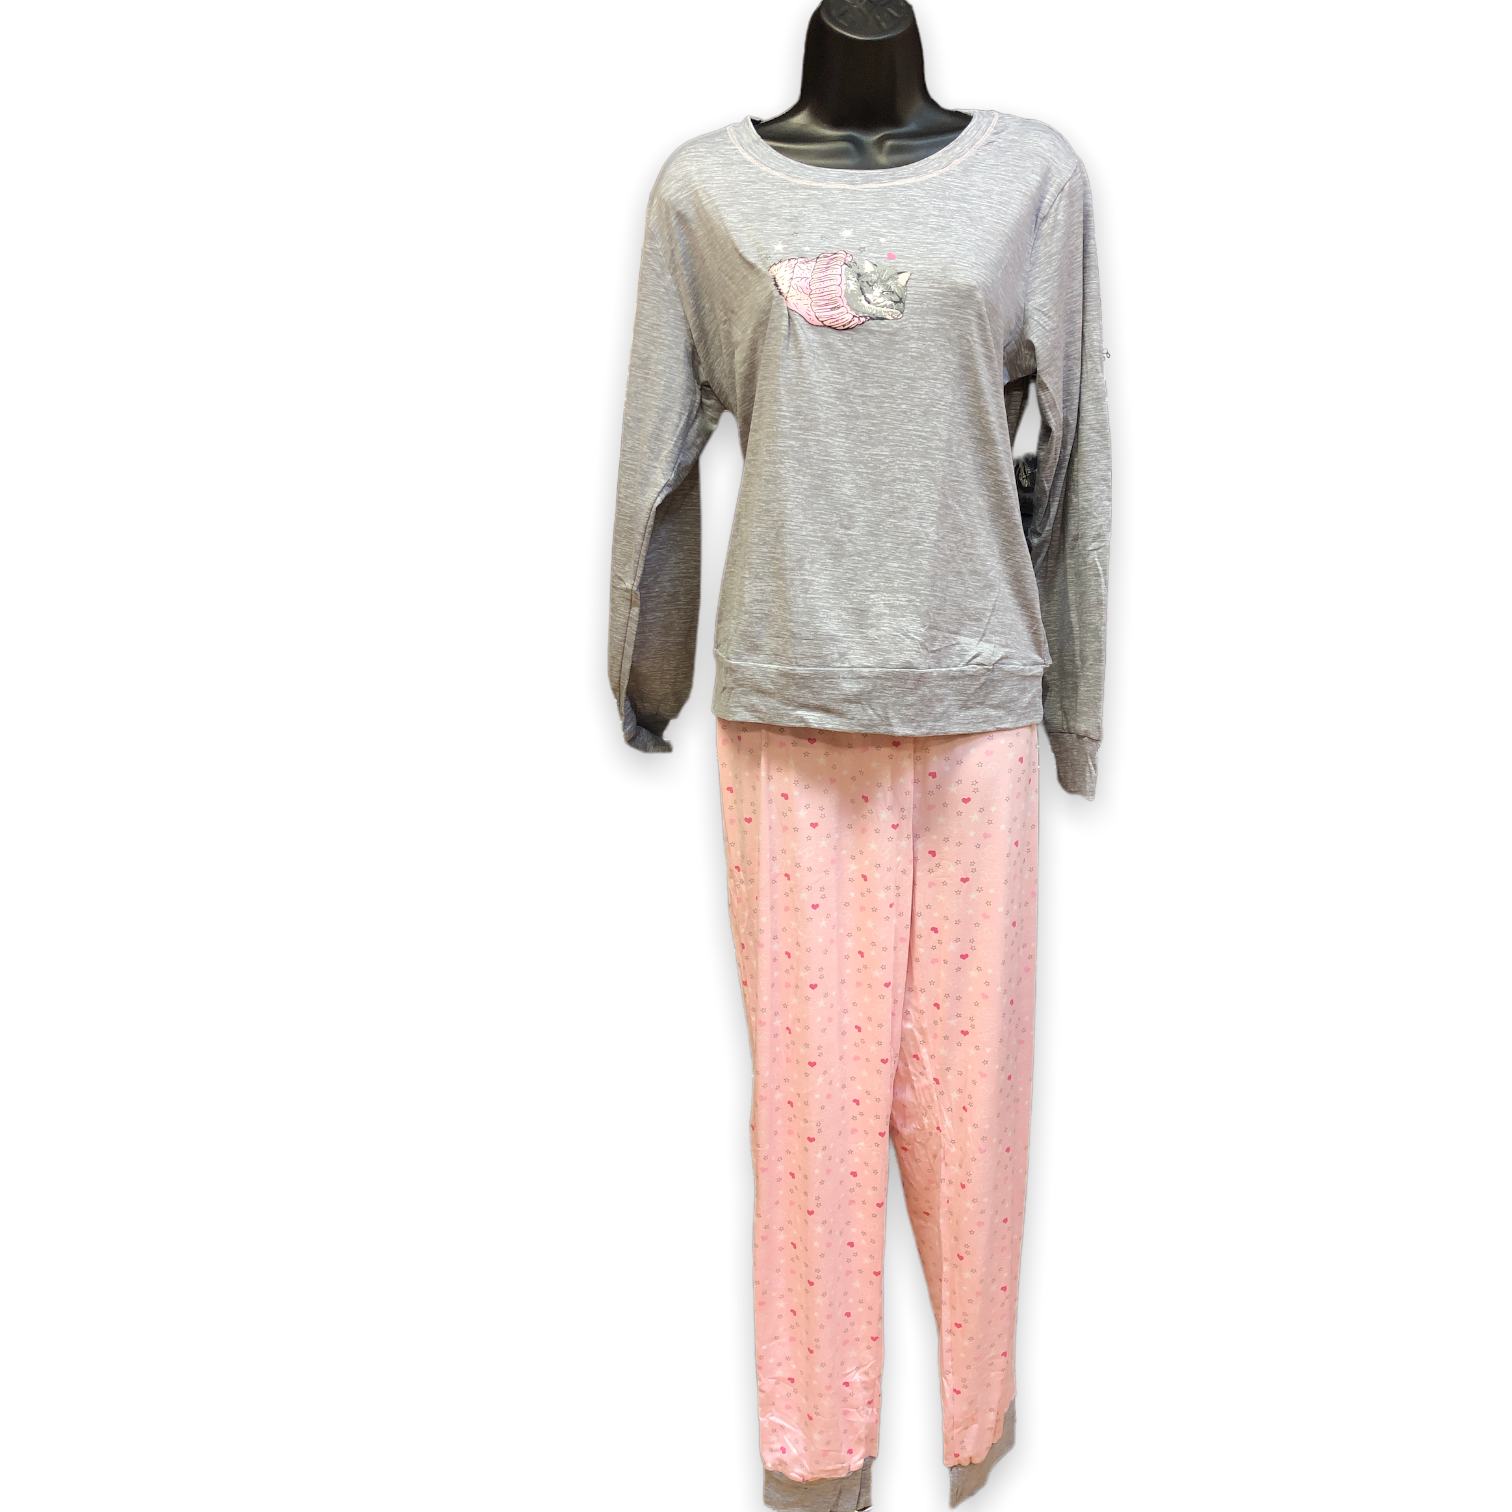 BULK BUY - Women's Two Piece Peached Jersey Pajama Set with Jogger Pants (6-Pack)